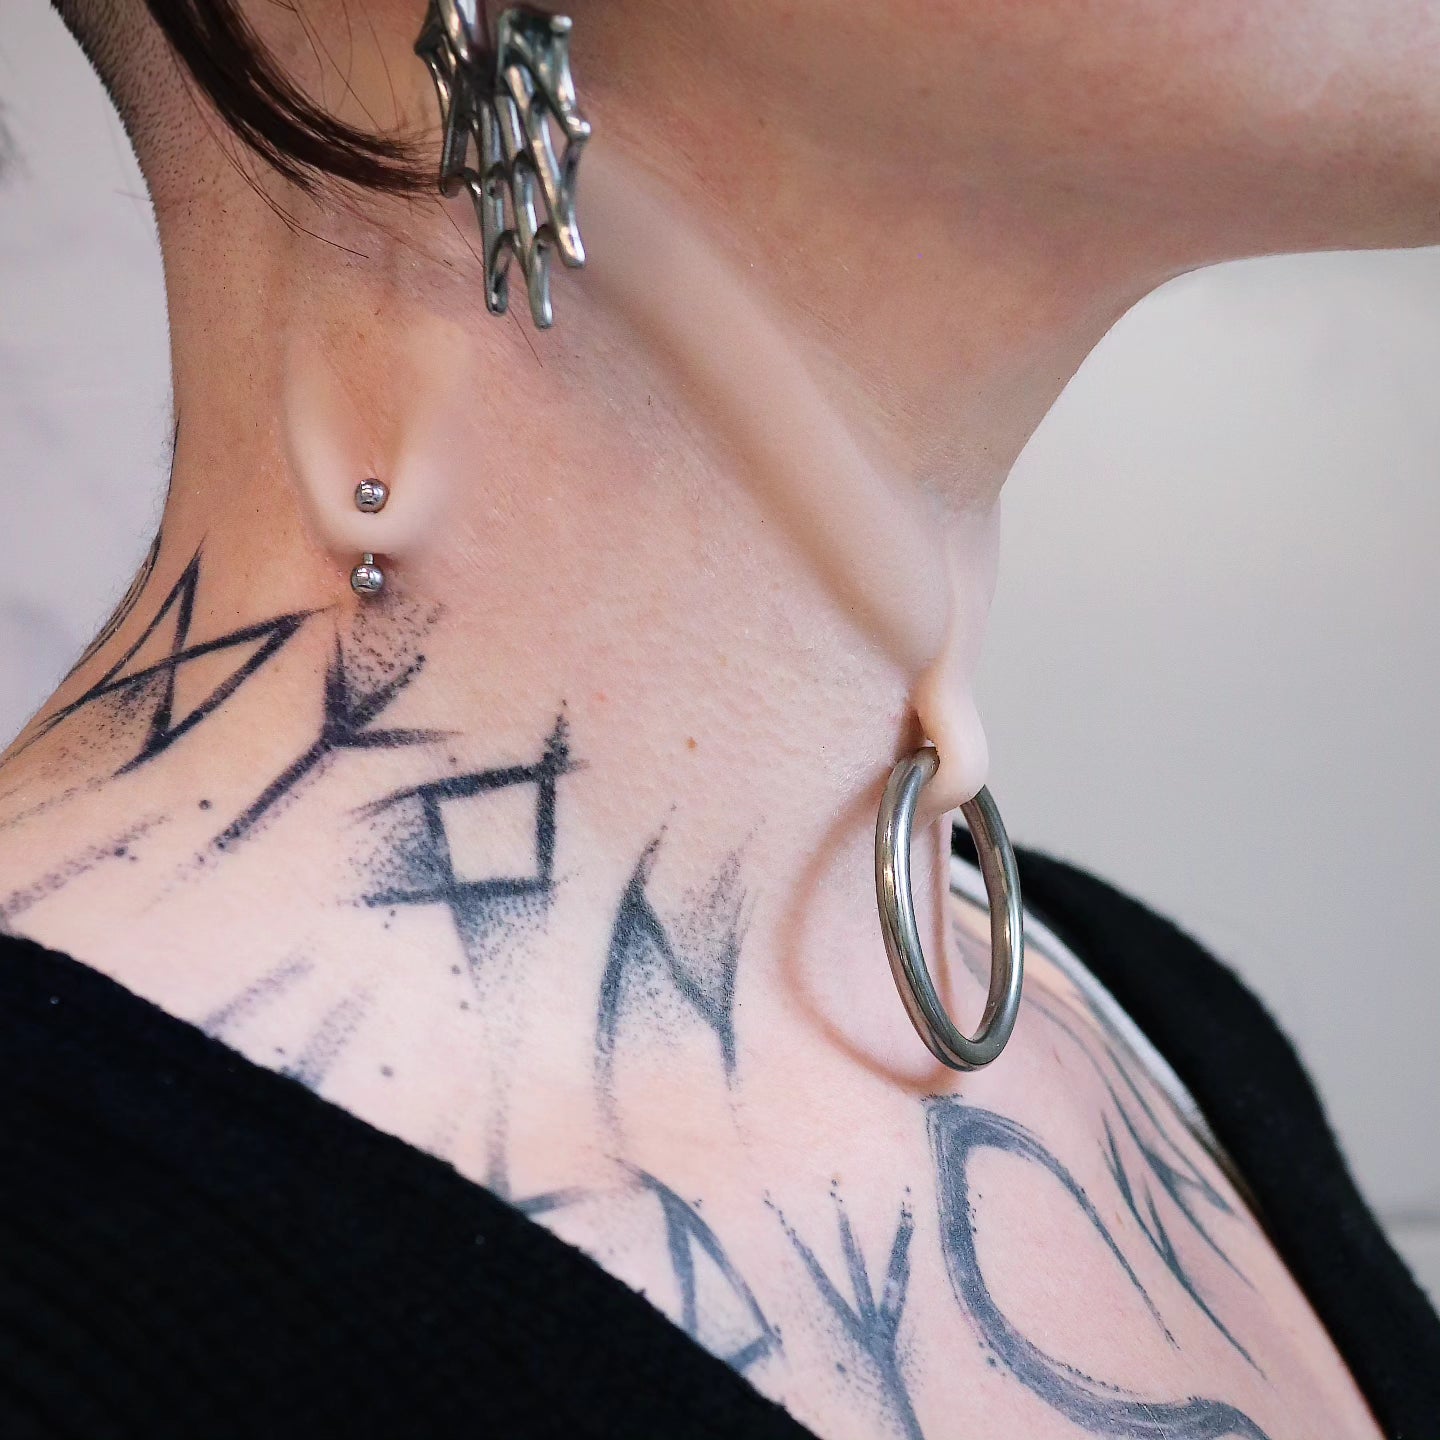 Woman's neck with a stretched piercing and subdermal choker prosthetic